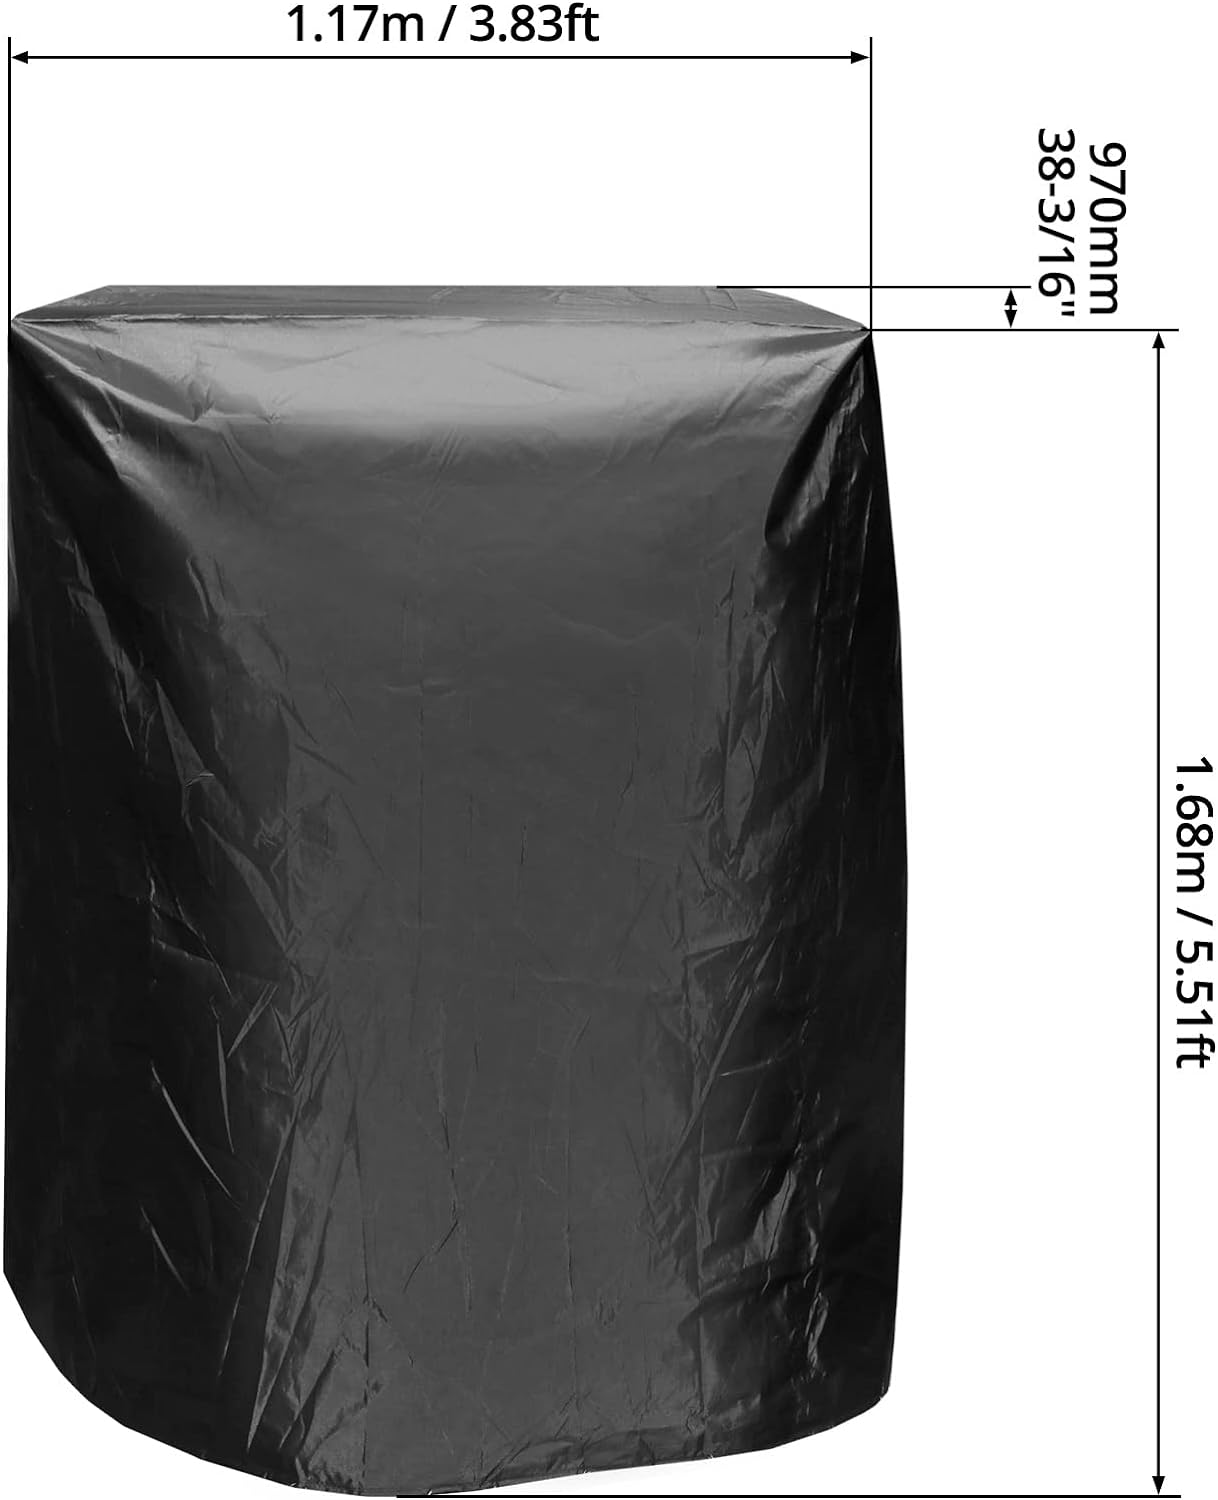 QWORK Black Treadmill Cover - Waterproof and Durable 46 L x 38 W x 66 H - Suitable for Most Folding Treadmills - Comes with Storage Bag